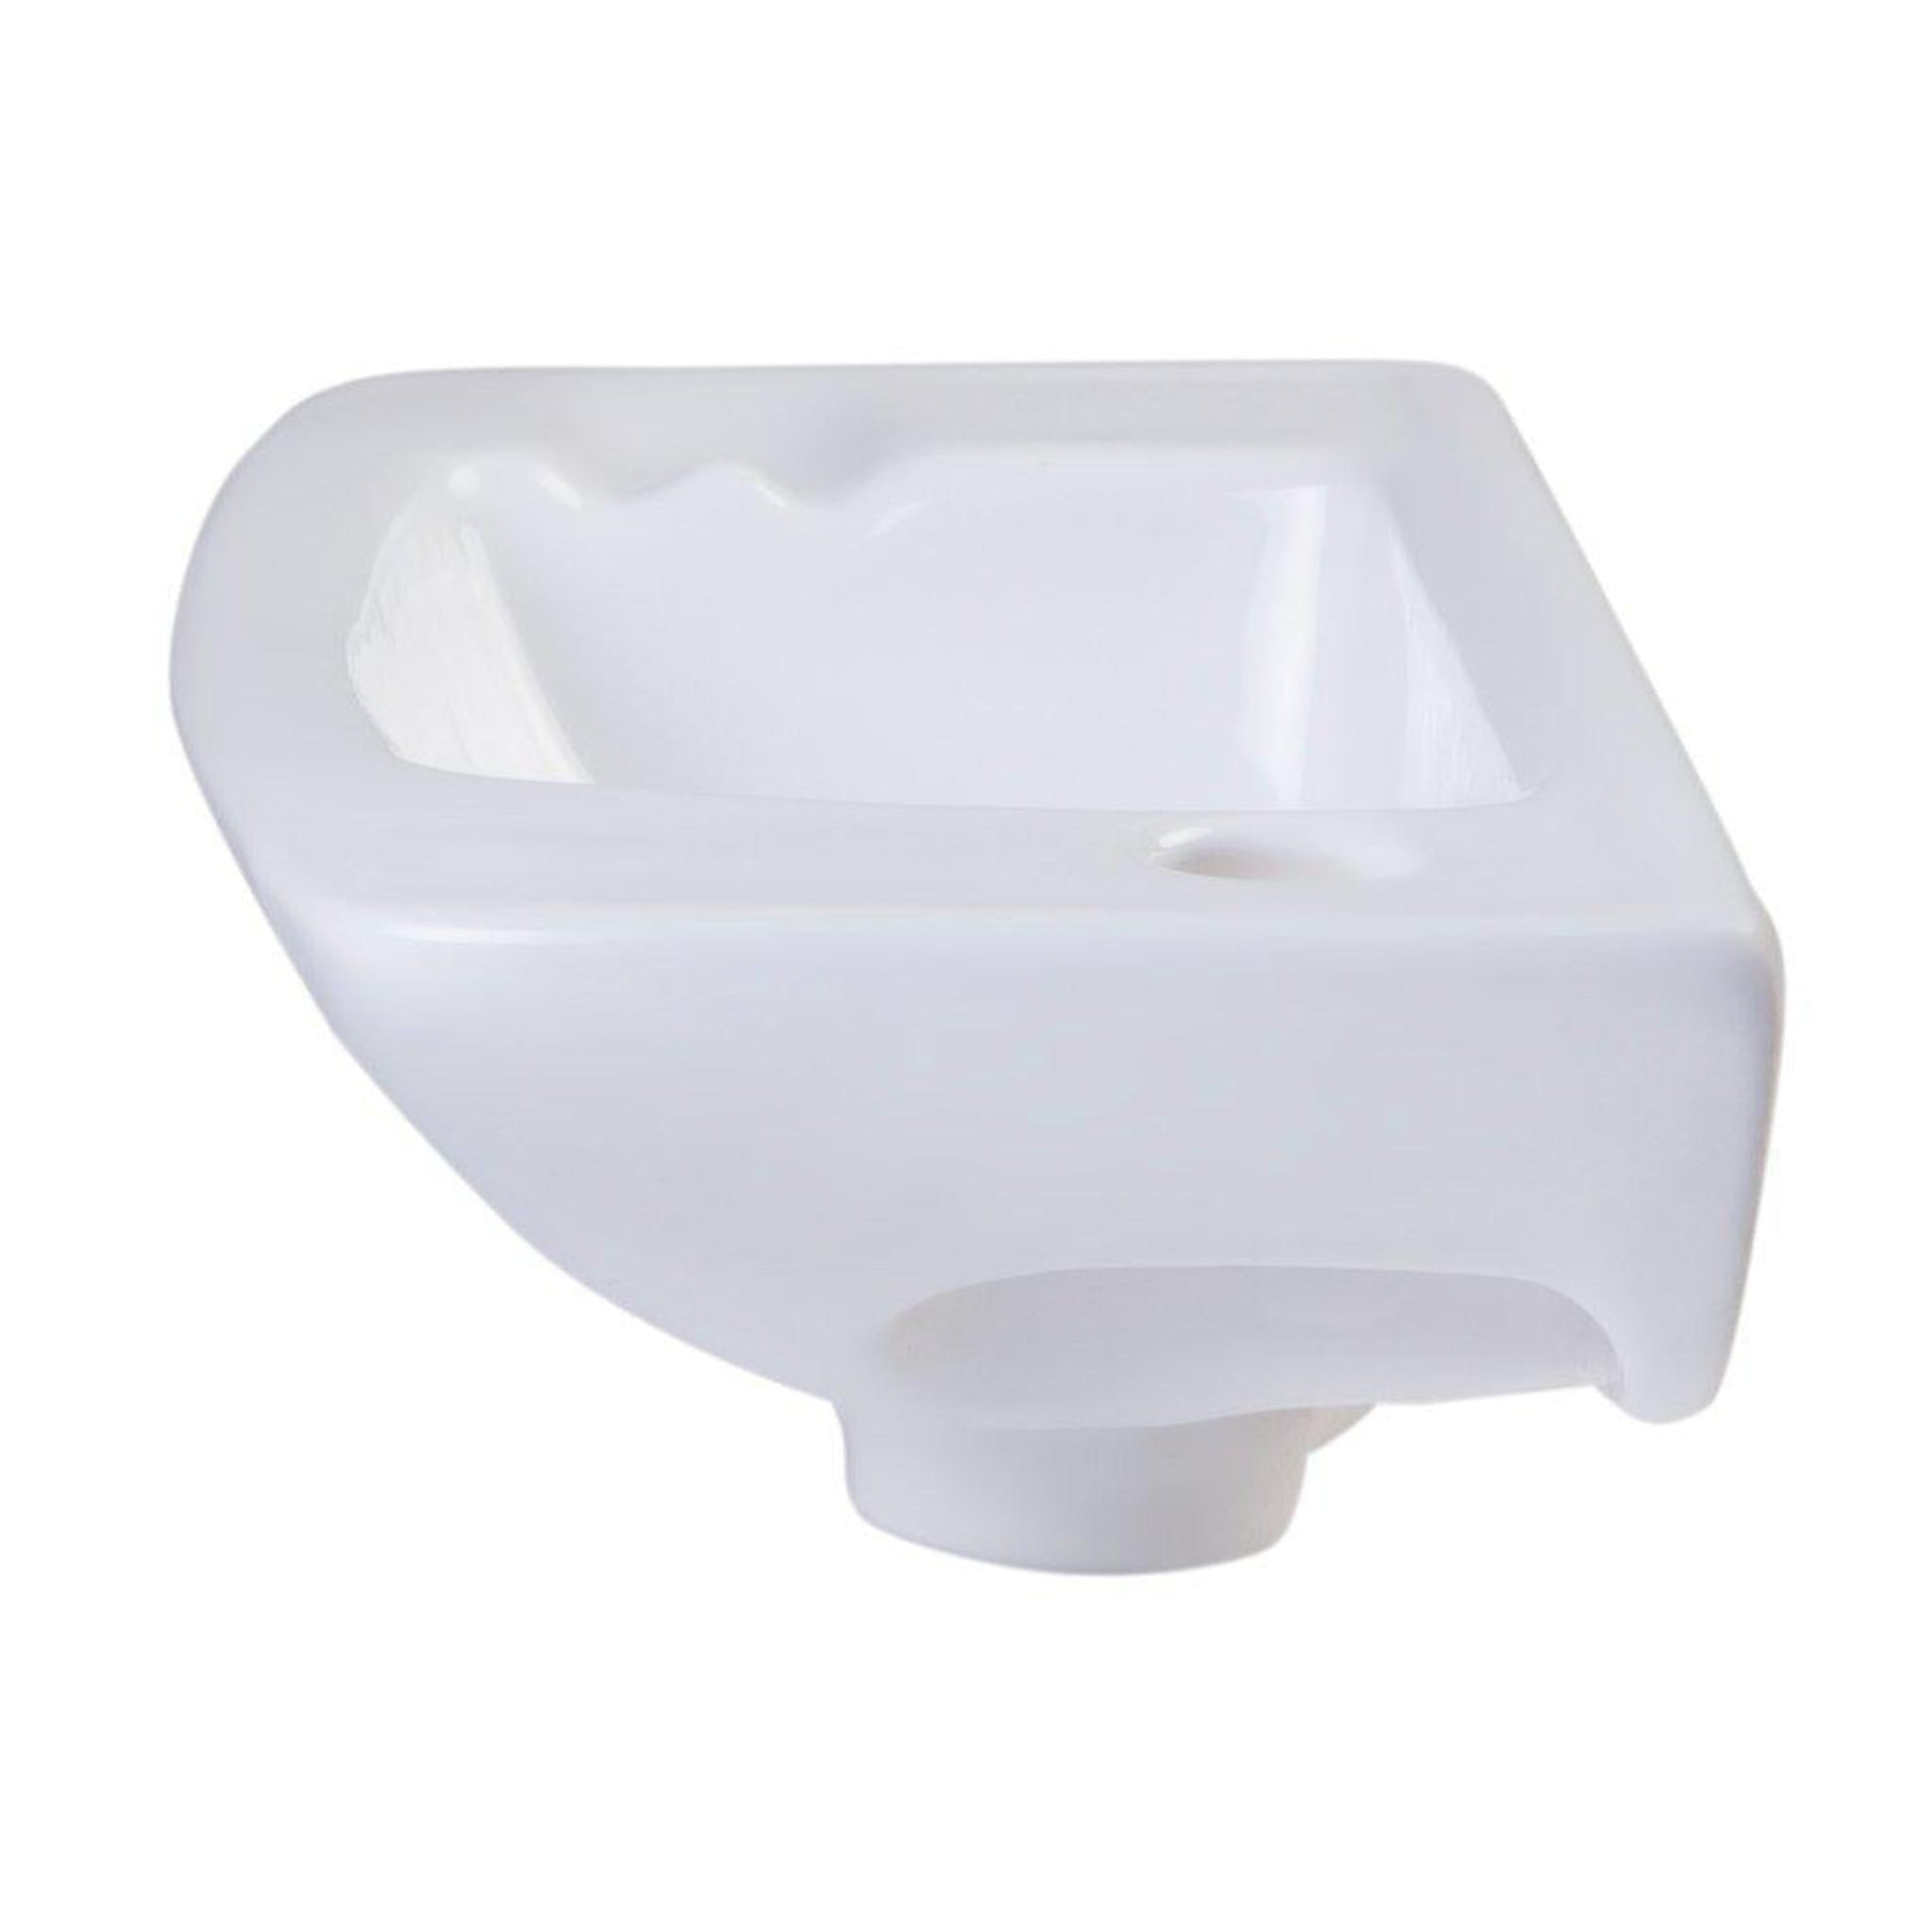 ALFI Brand AB103 18" White Wall-Mounted Rectangle Ceramic Bathroom Sink With Single Faucet Hole